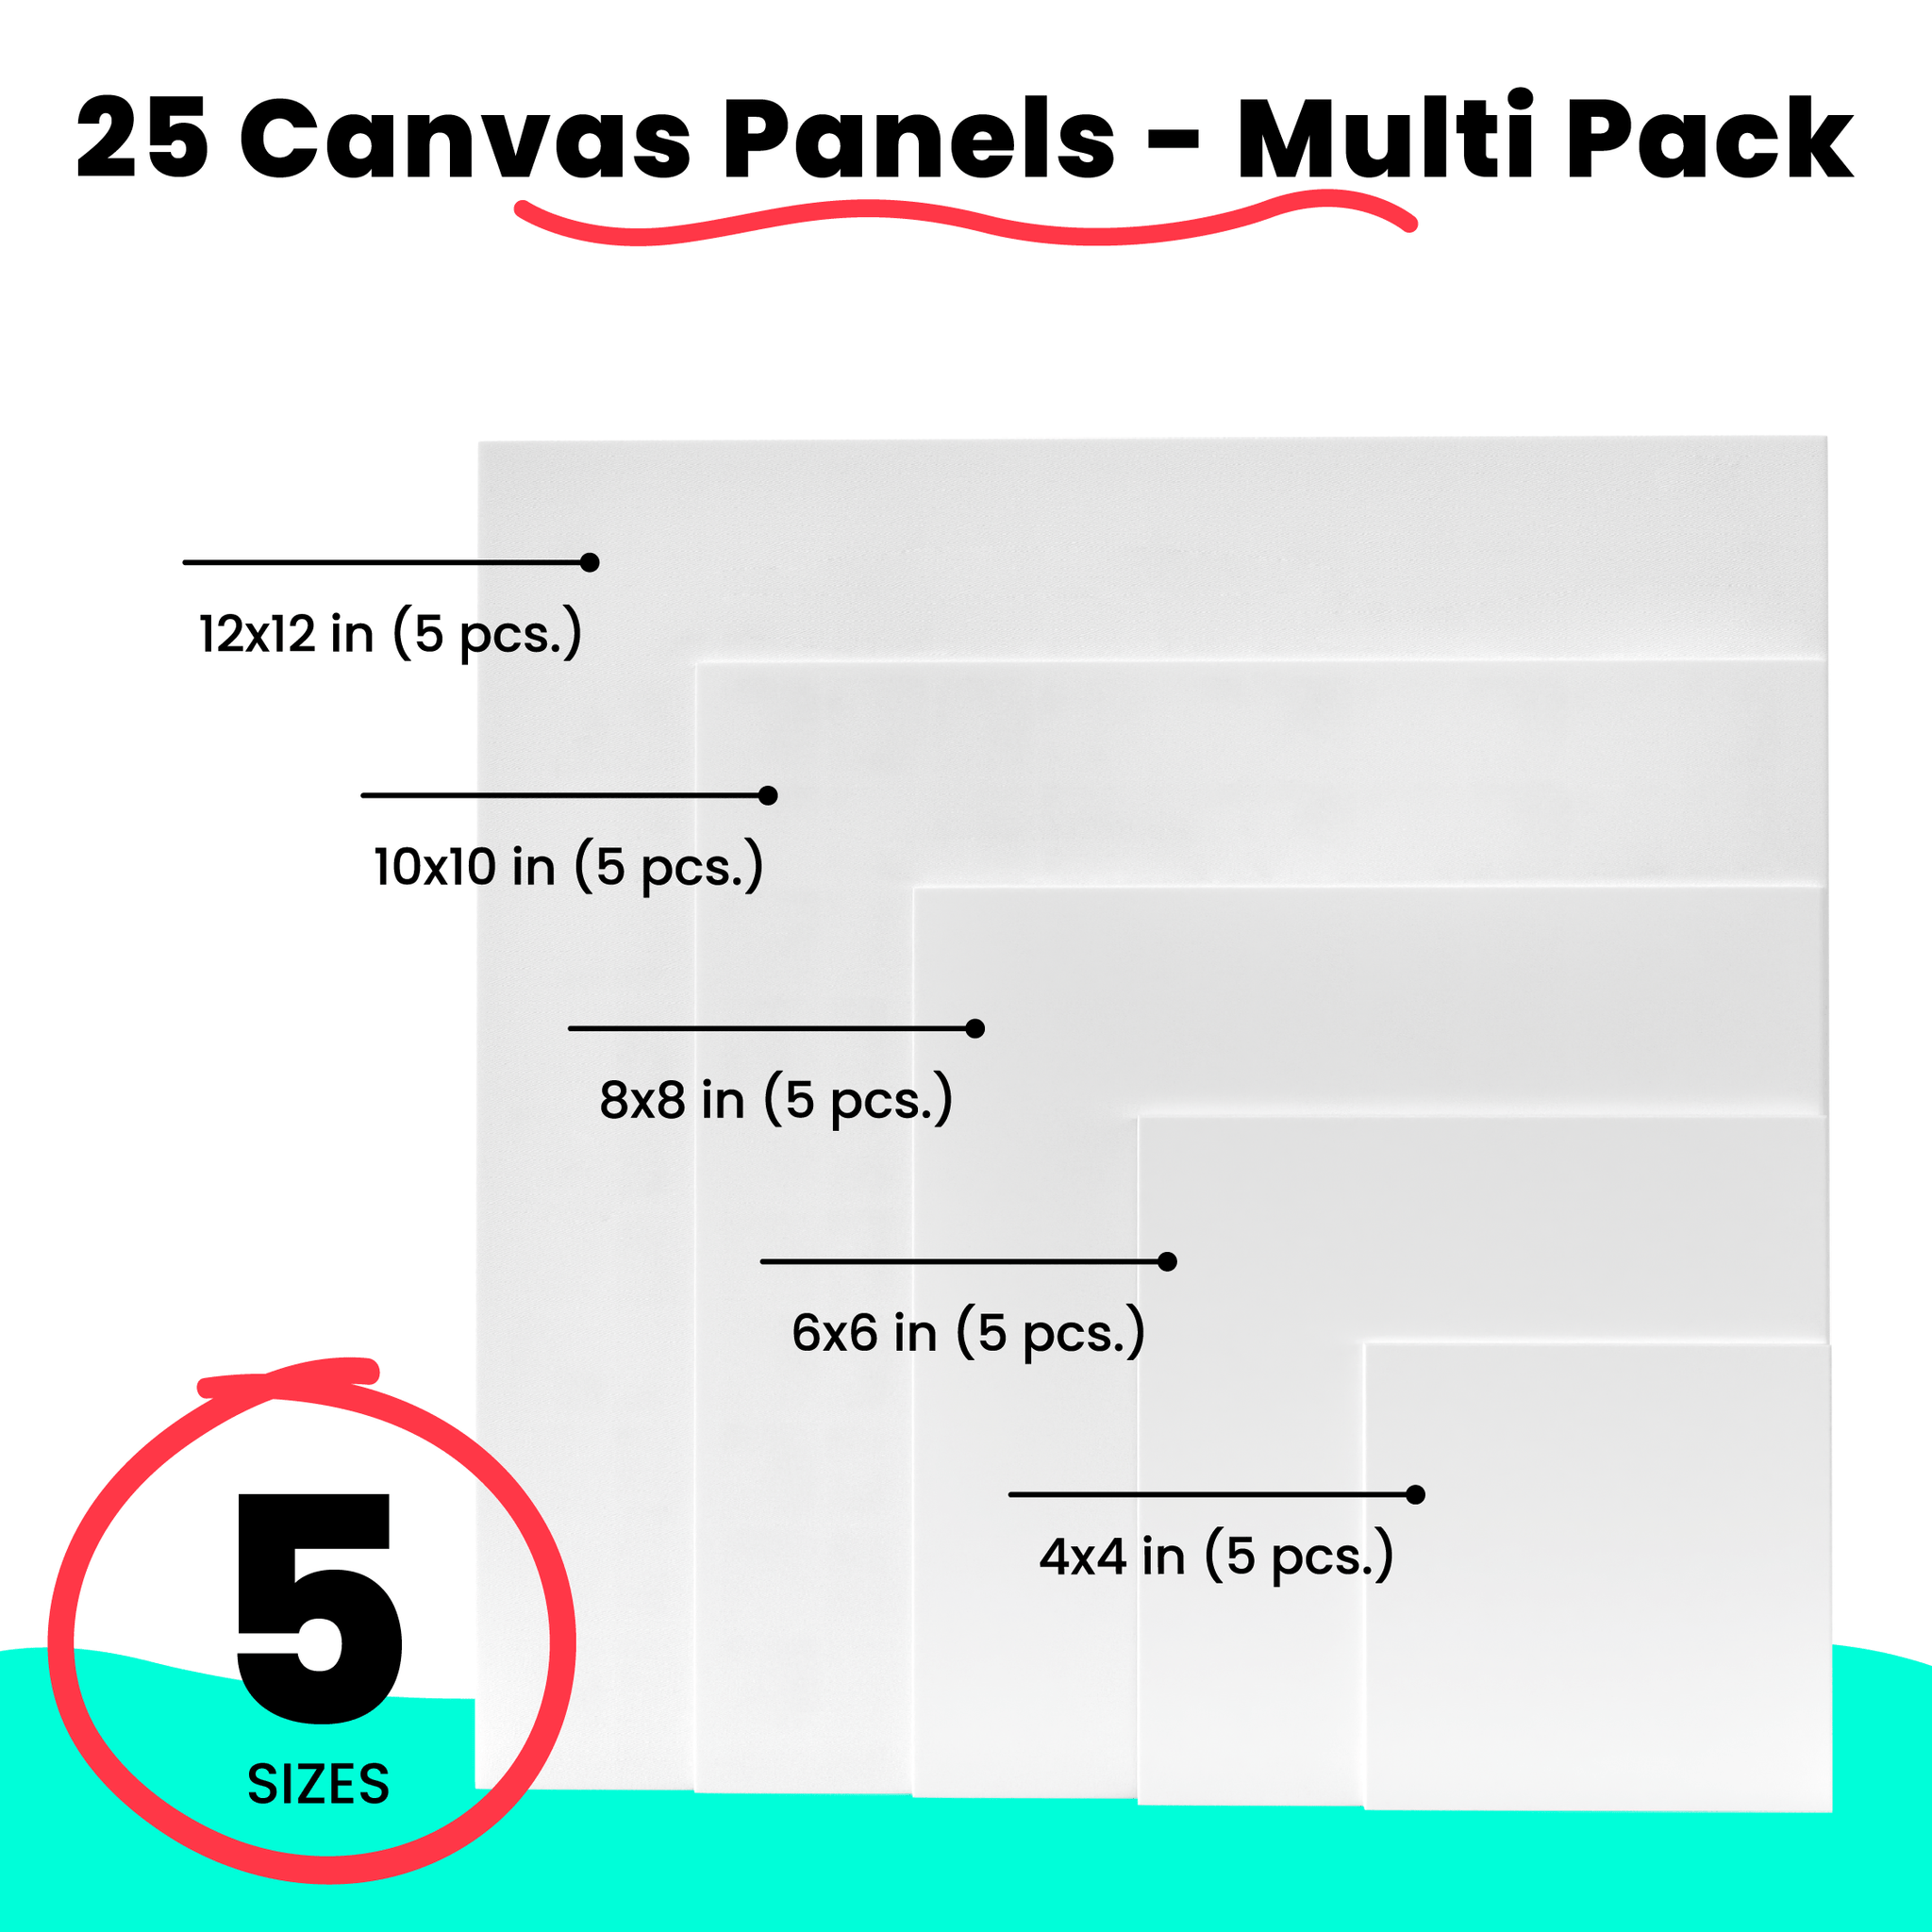 Chalkola Paint Canvases for Painting Multipack - 20 Pack Blank Canvas  Panels - 5x7, 8x10, 9x12, 11x14 inch (5 Each) - 100% Cotton, Primed, Acid  Free